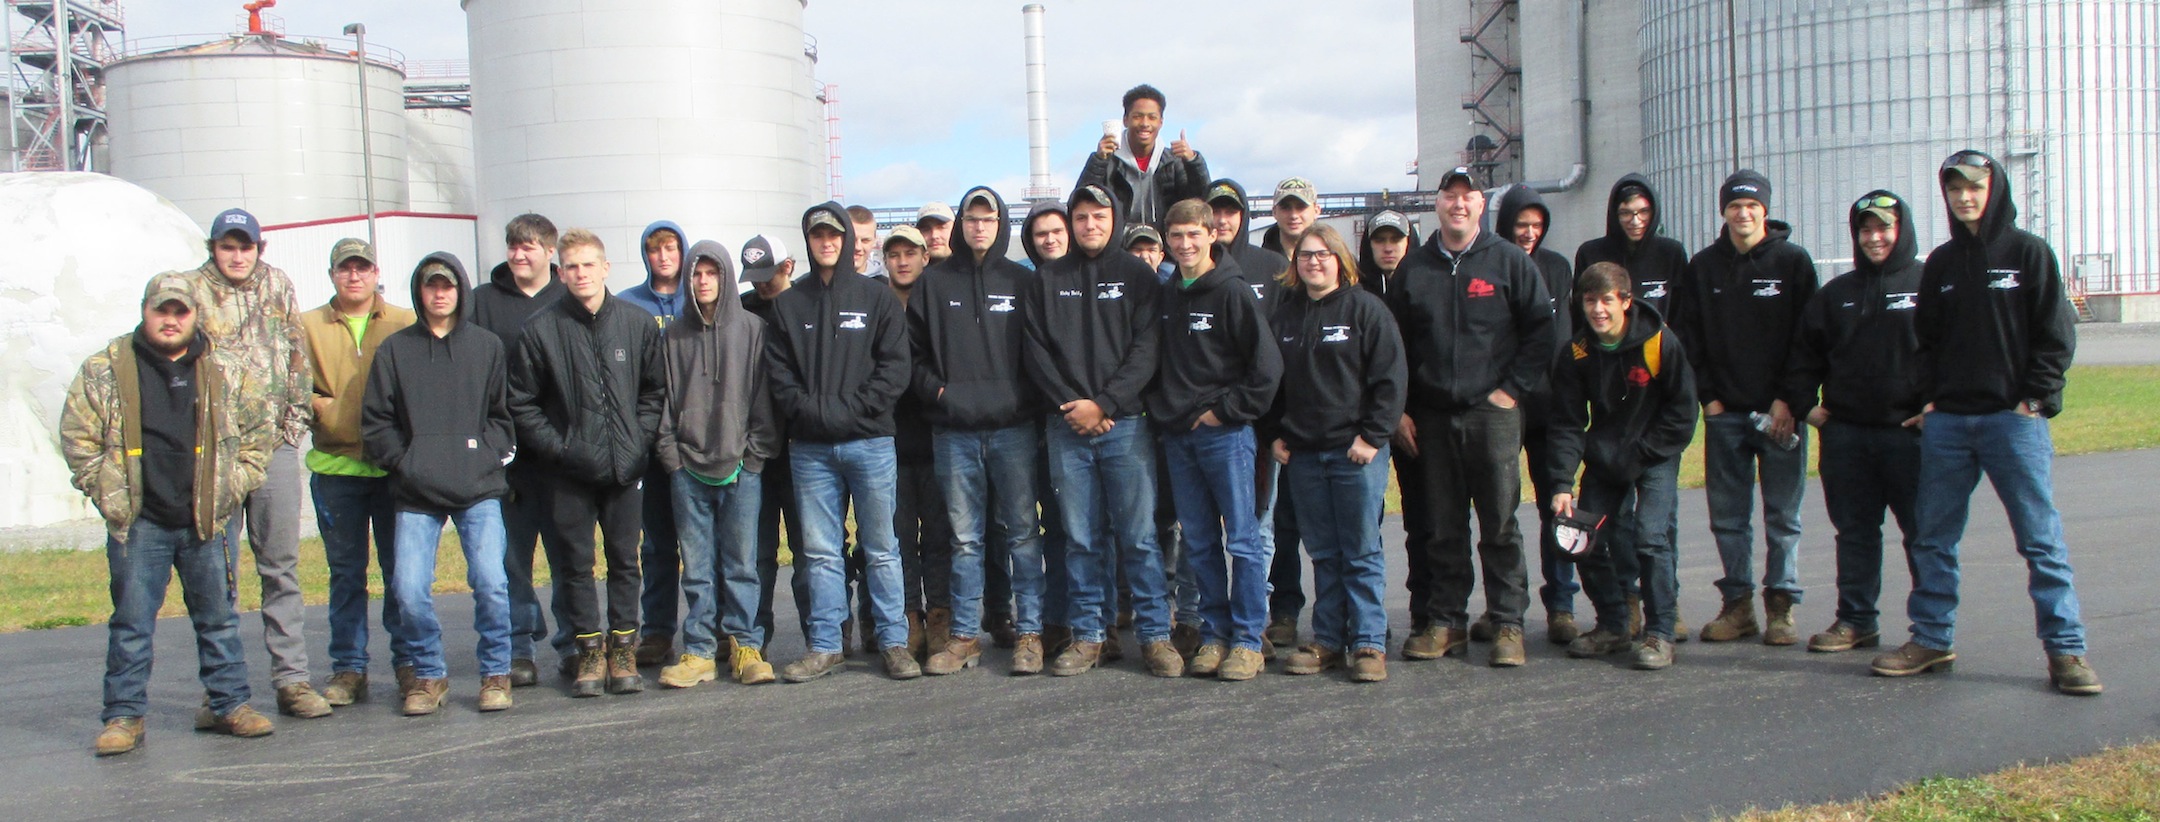 The junior and senior classes of the Niagara Career and Technical Education Center's Diesel Technology program.   